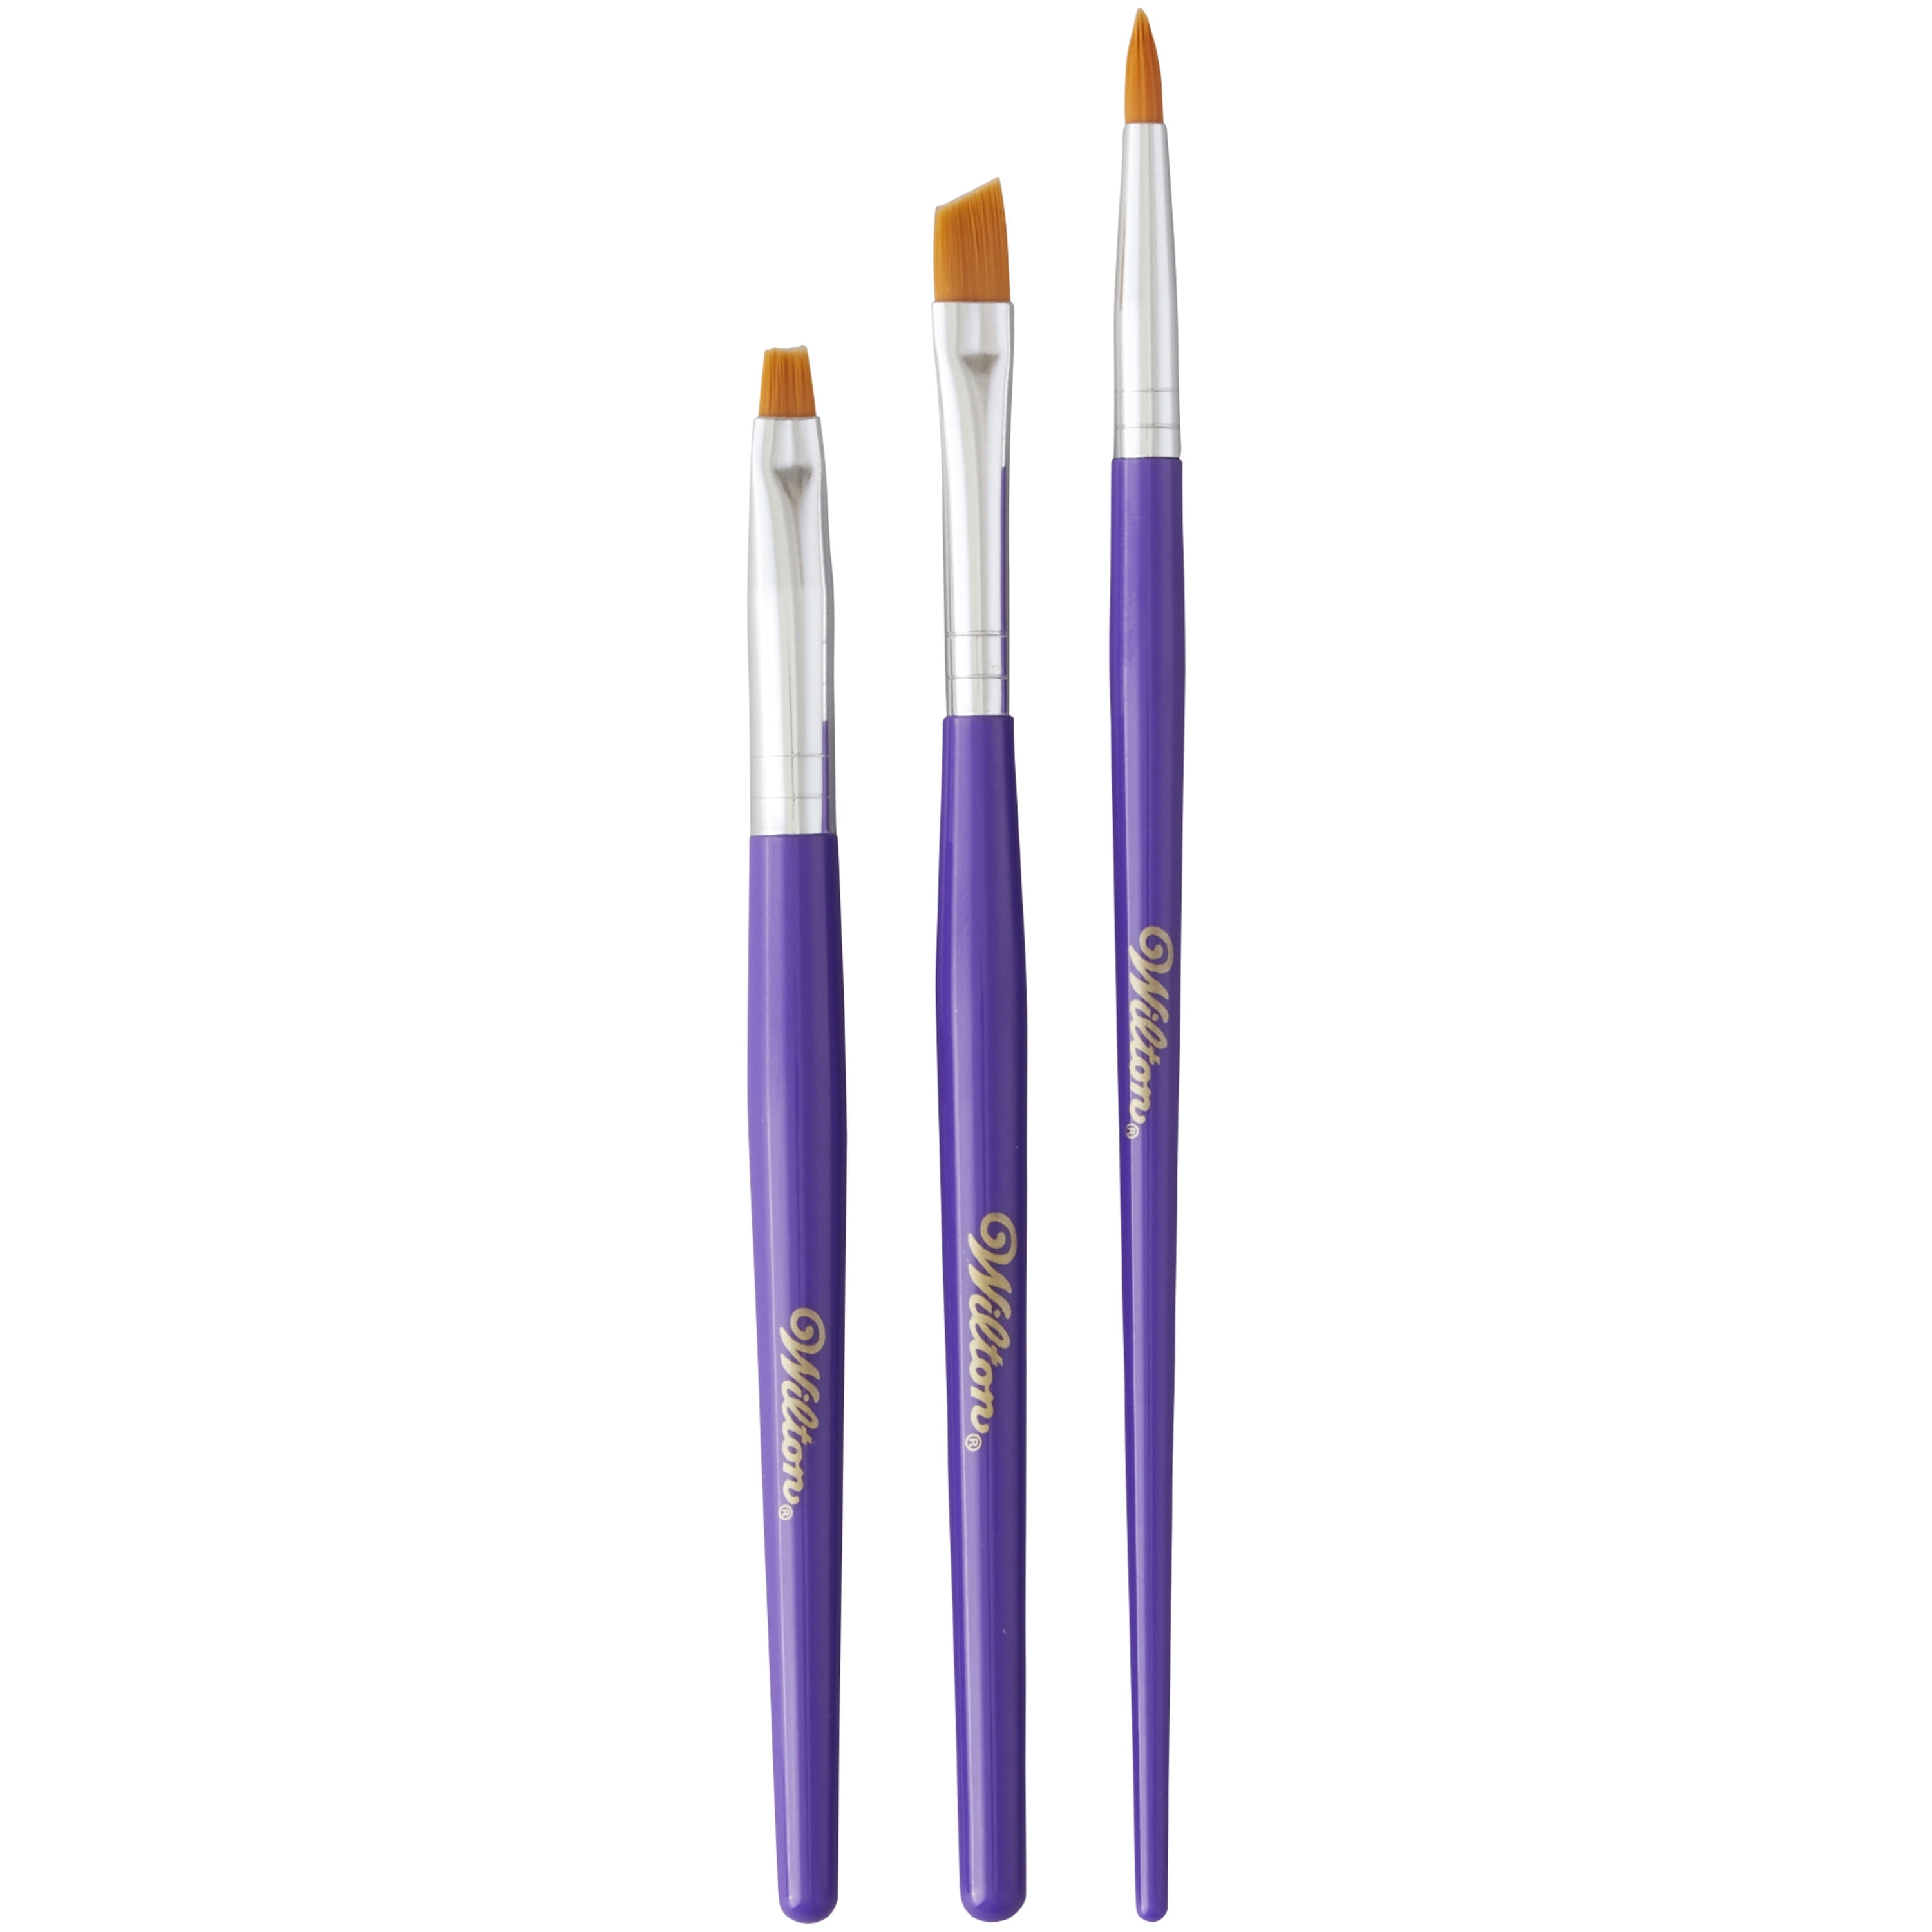 3 pieces of random color oil brushes, practical baking brushes for